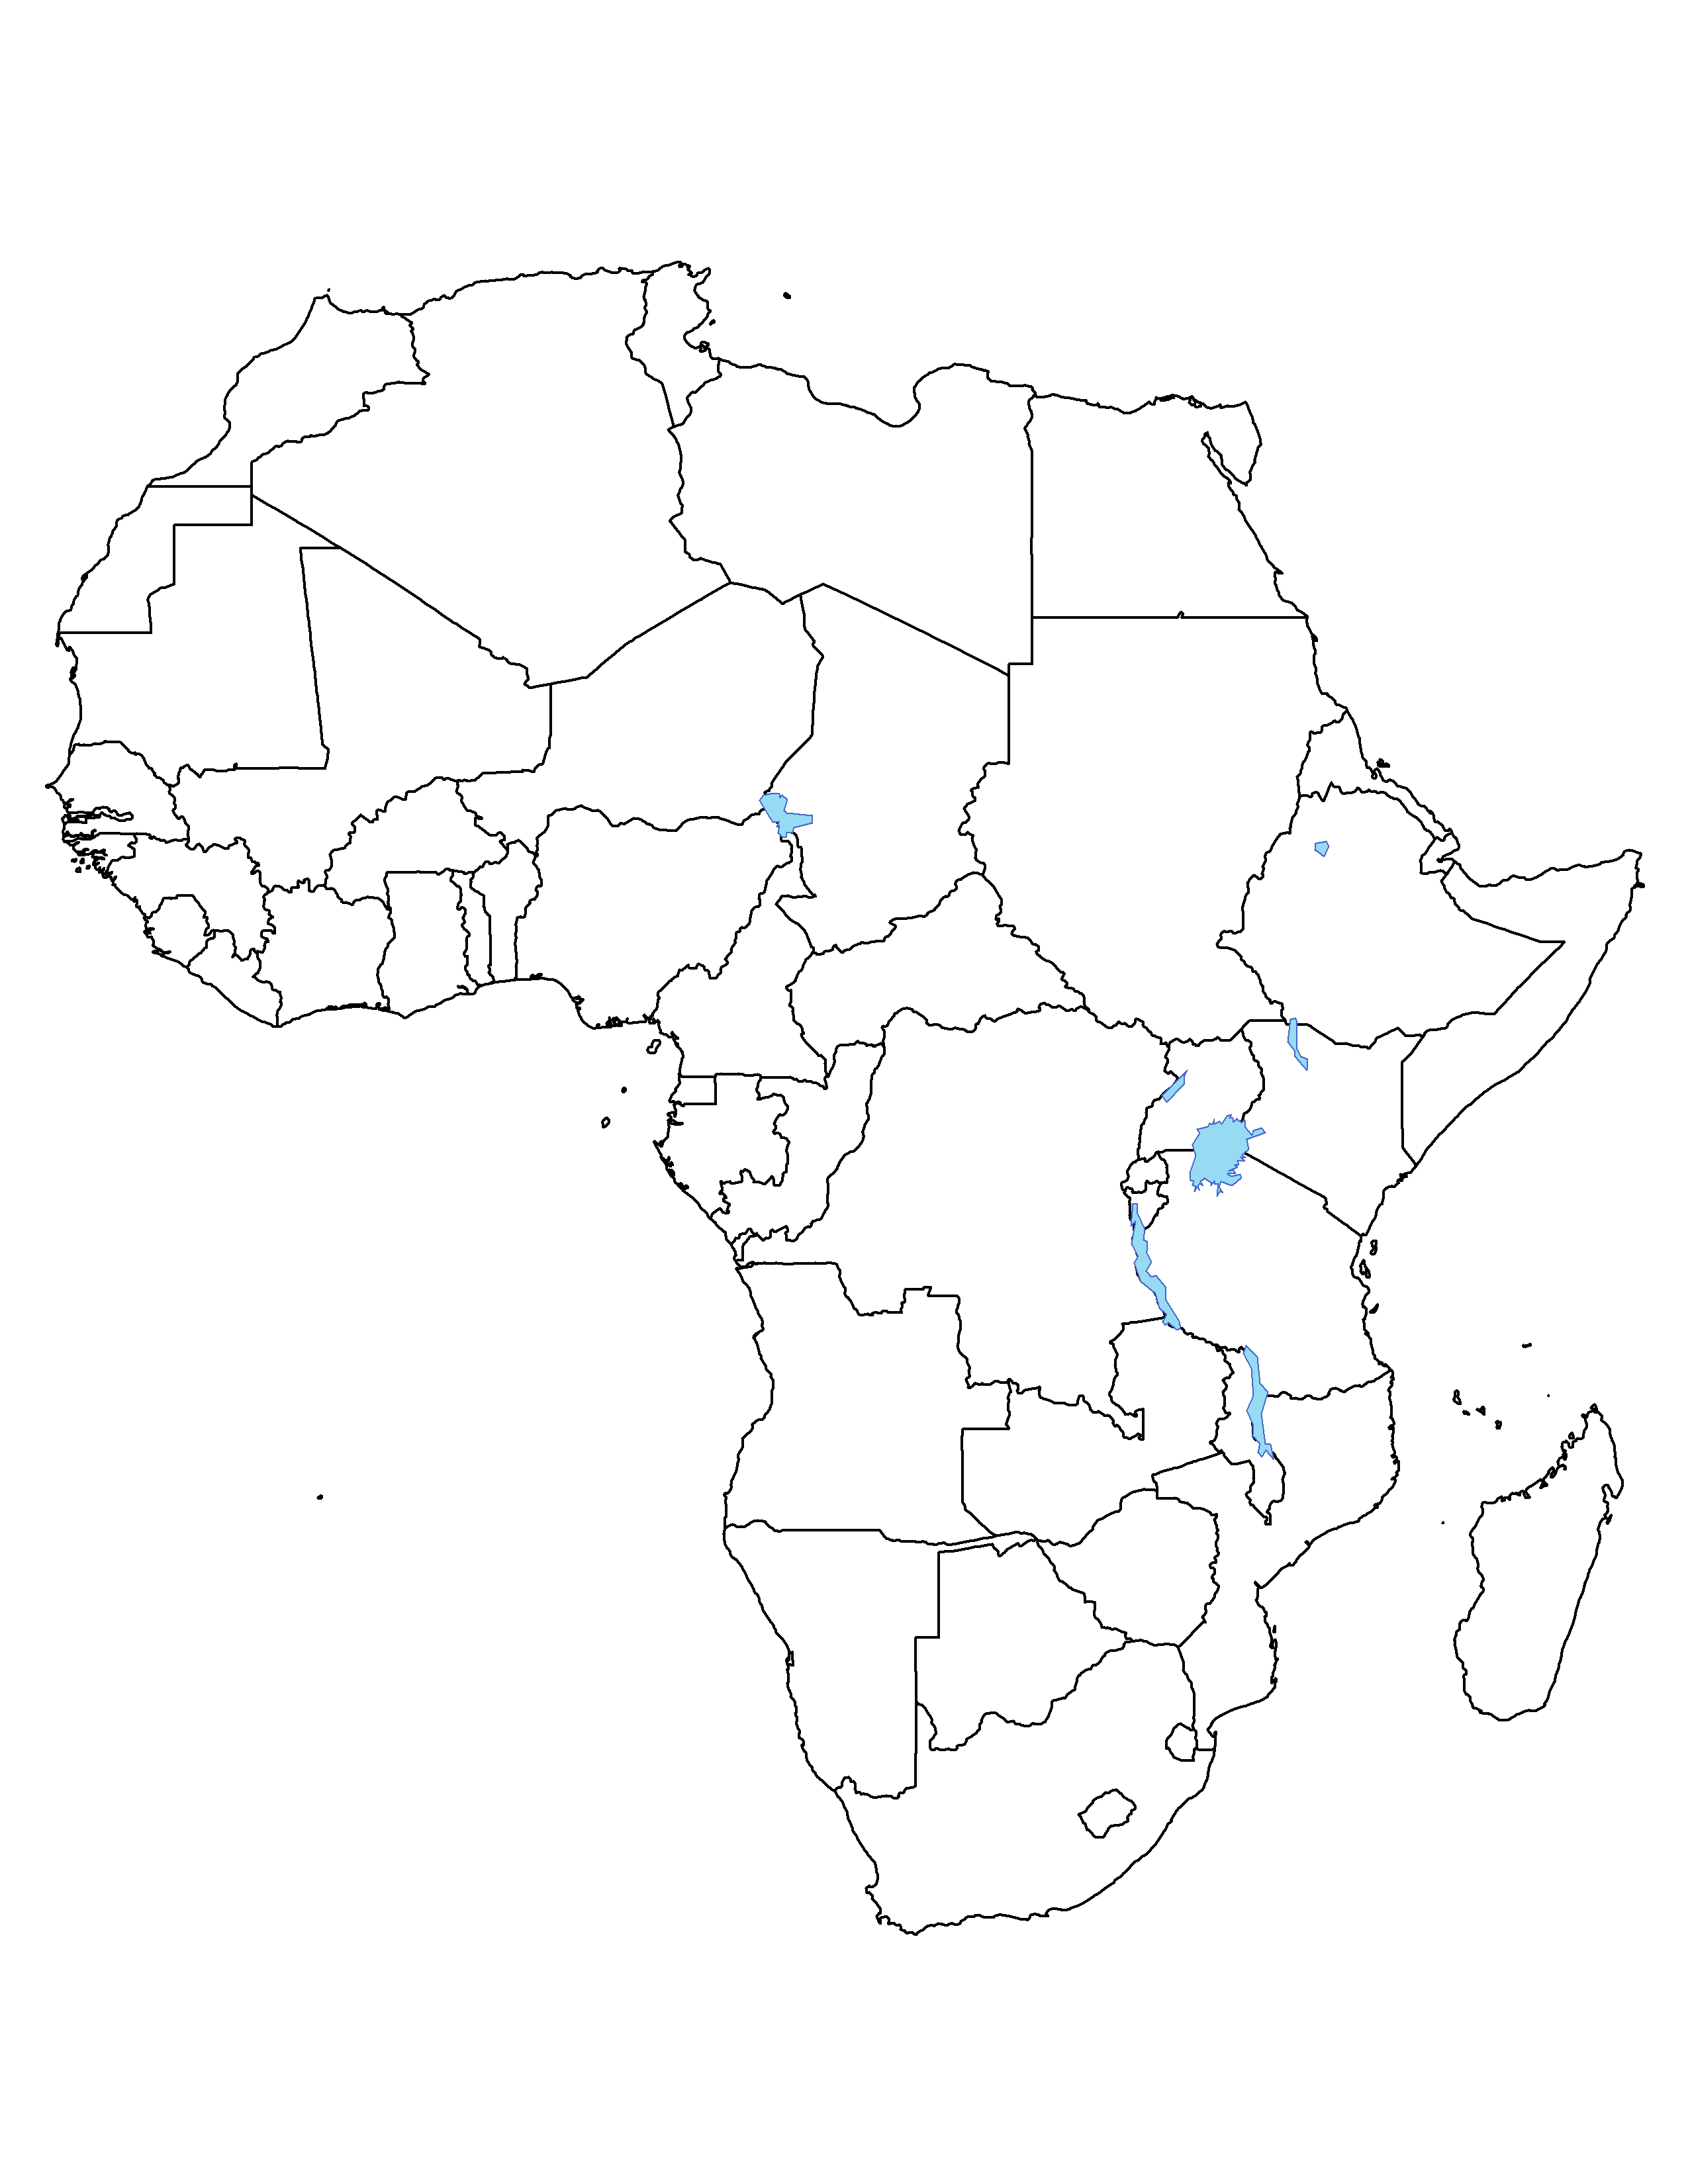 Africa Political Outline Map Full size Gifex